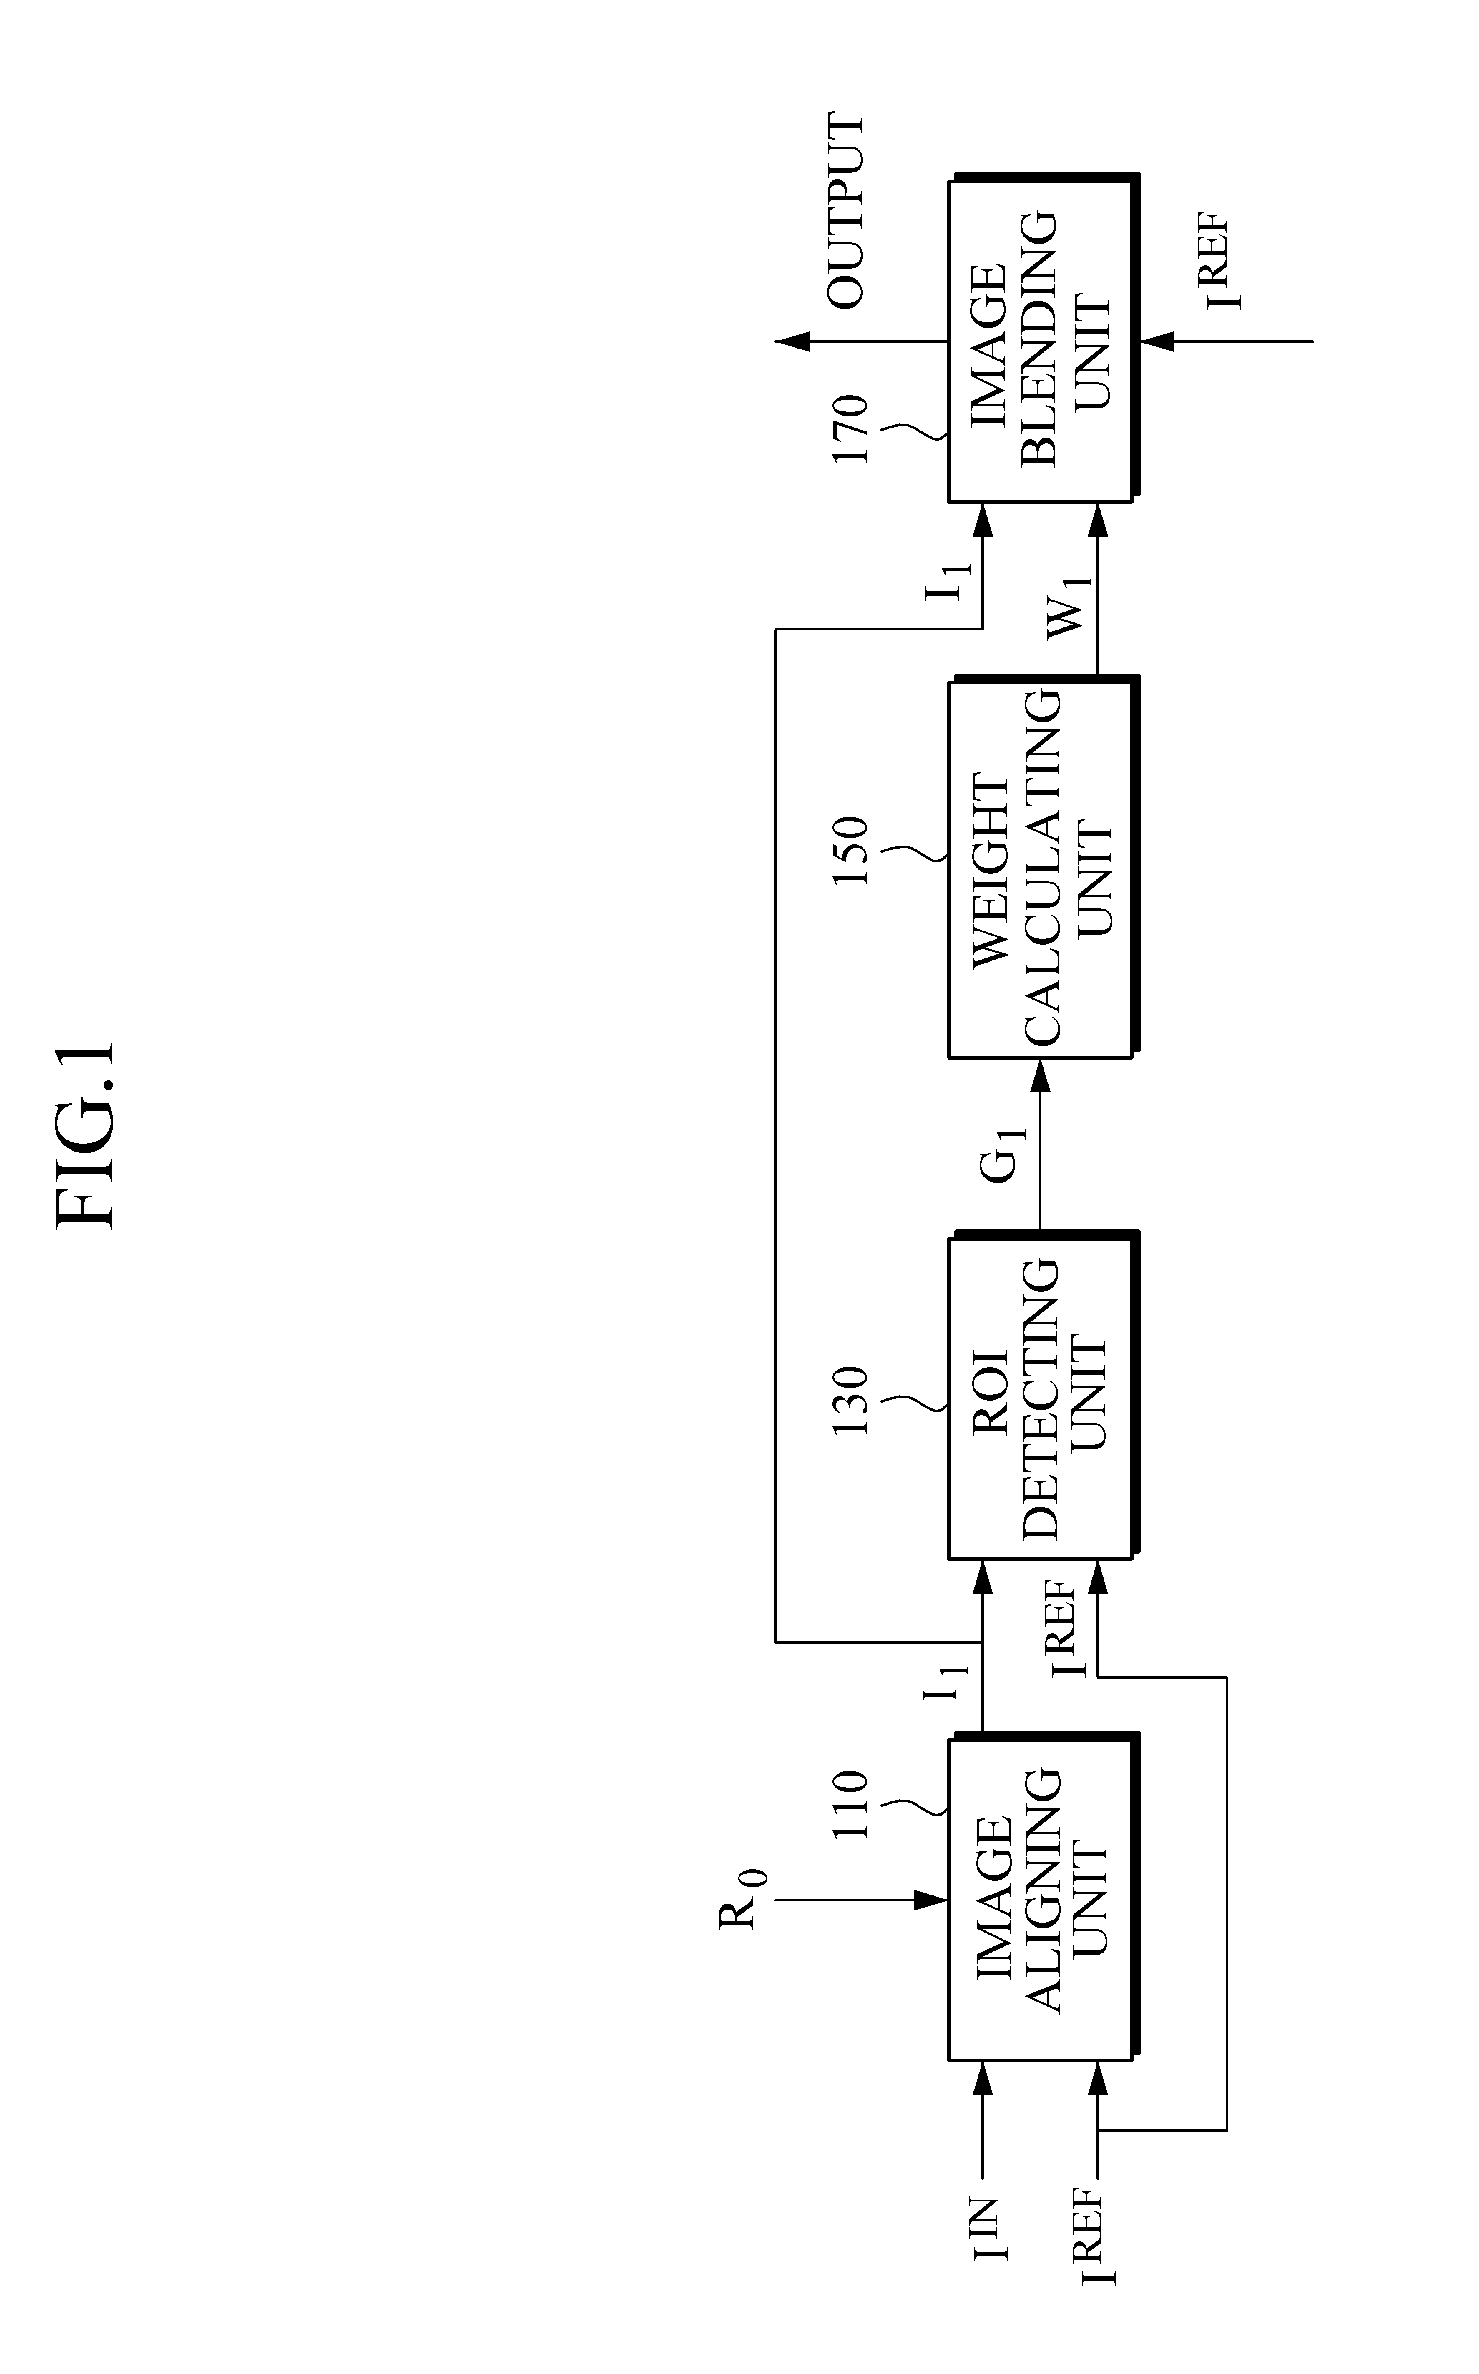 Method and apparatus for blending images